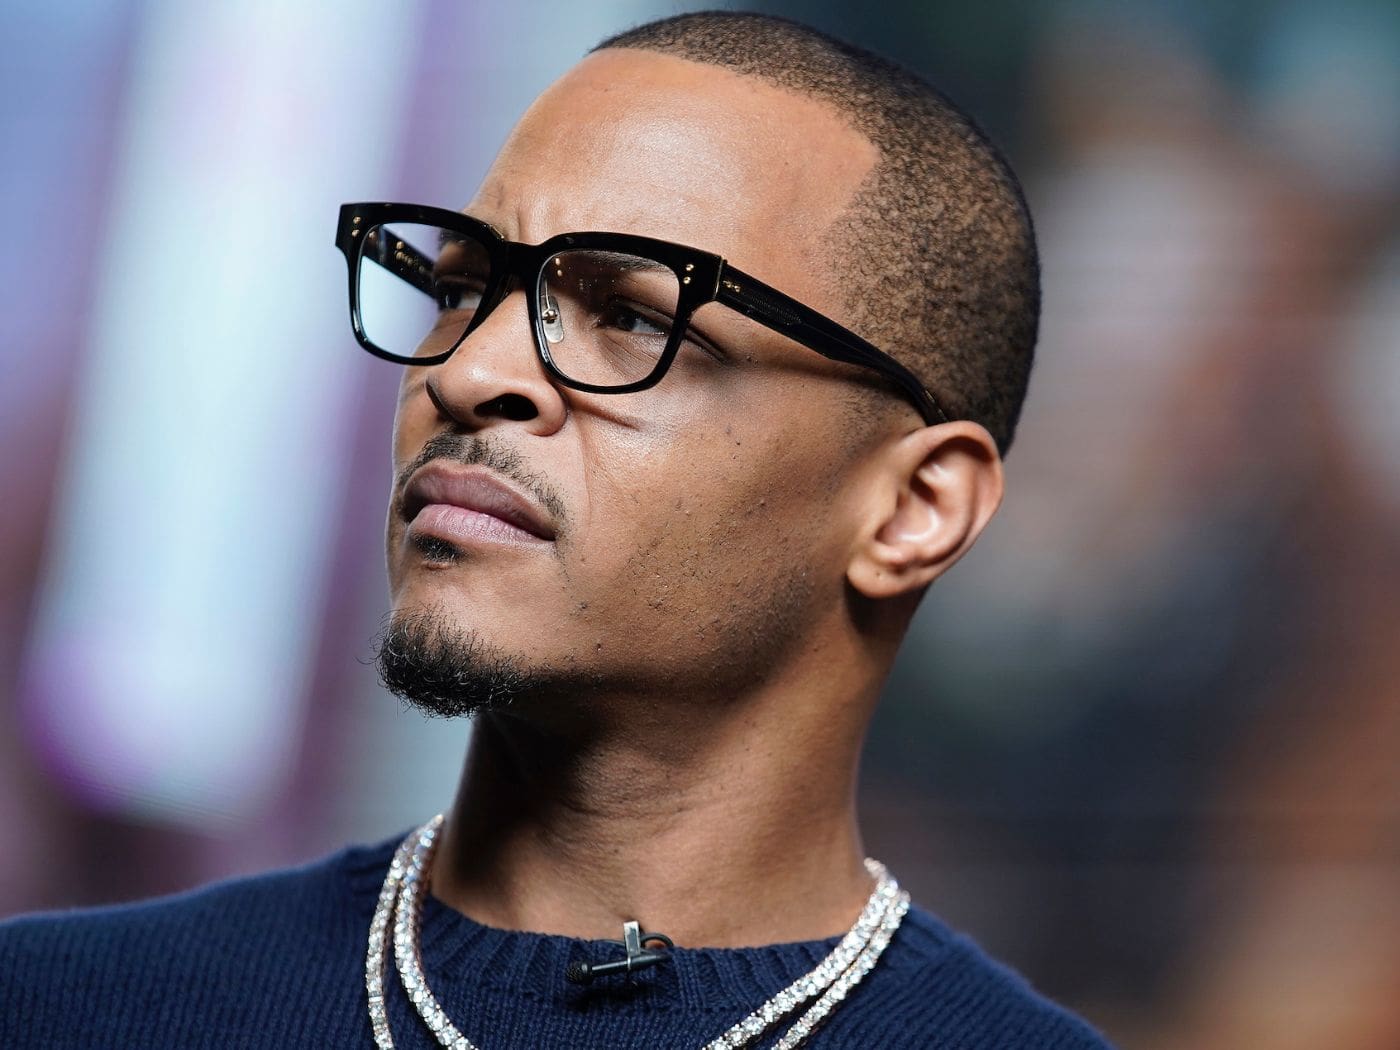 T.I. Shares A Message In The Memory Of Rev. C.T. Vivian And Rep. John Lewis